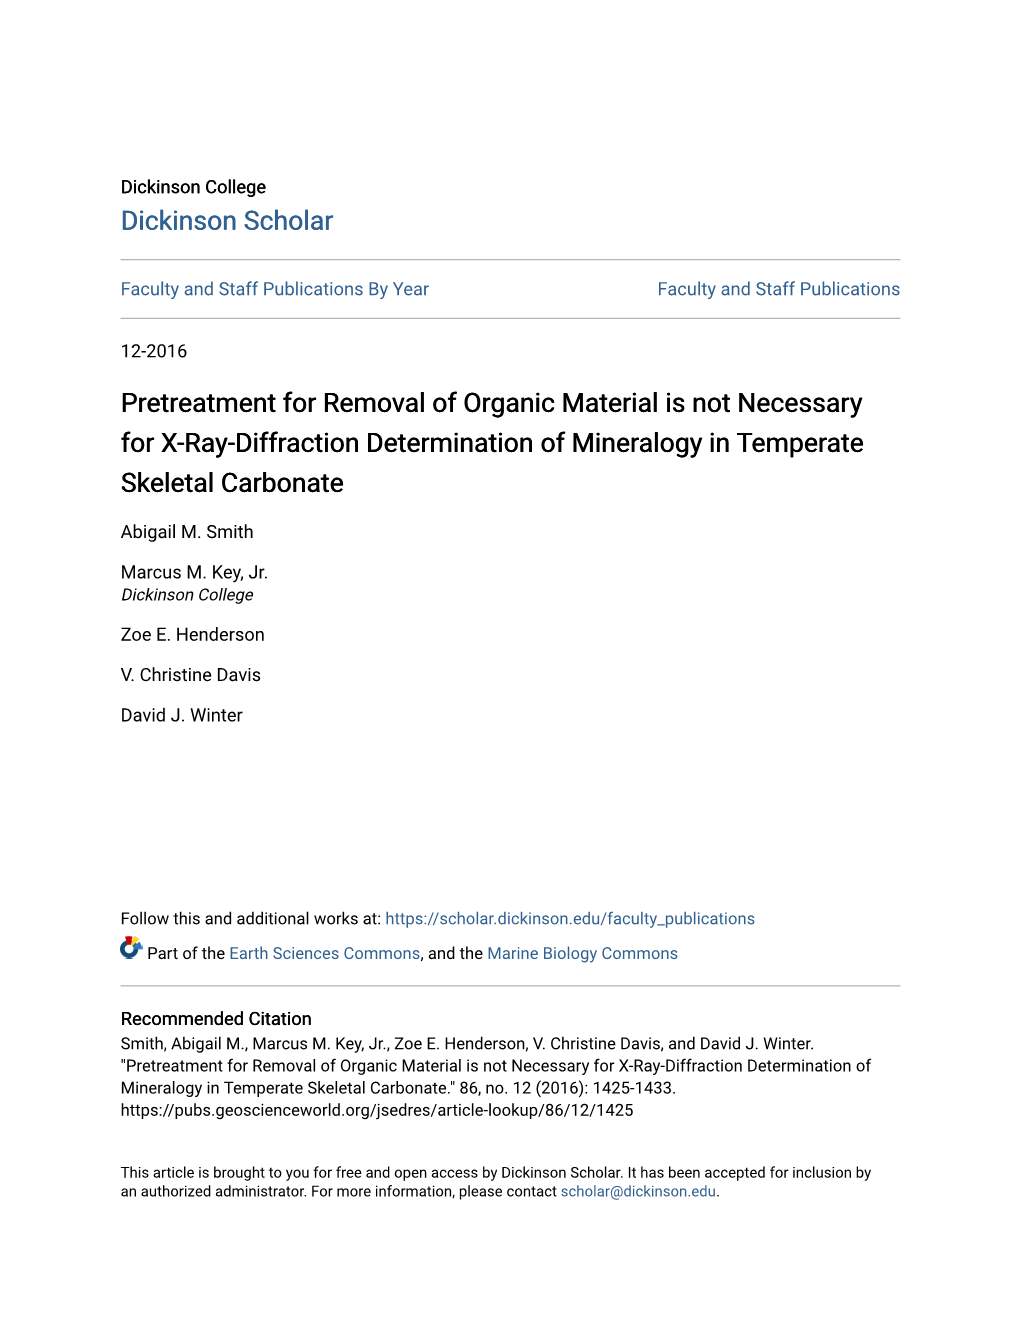 Pretreatment for Removal of Organic Material Is Not Necessary for X-Ray-Diffraction Determination of Mineralogy in Temperate Skeletal Carbonate